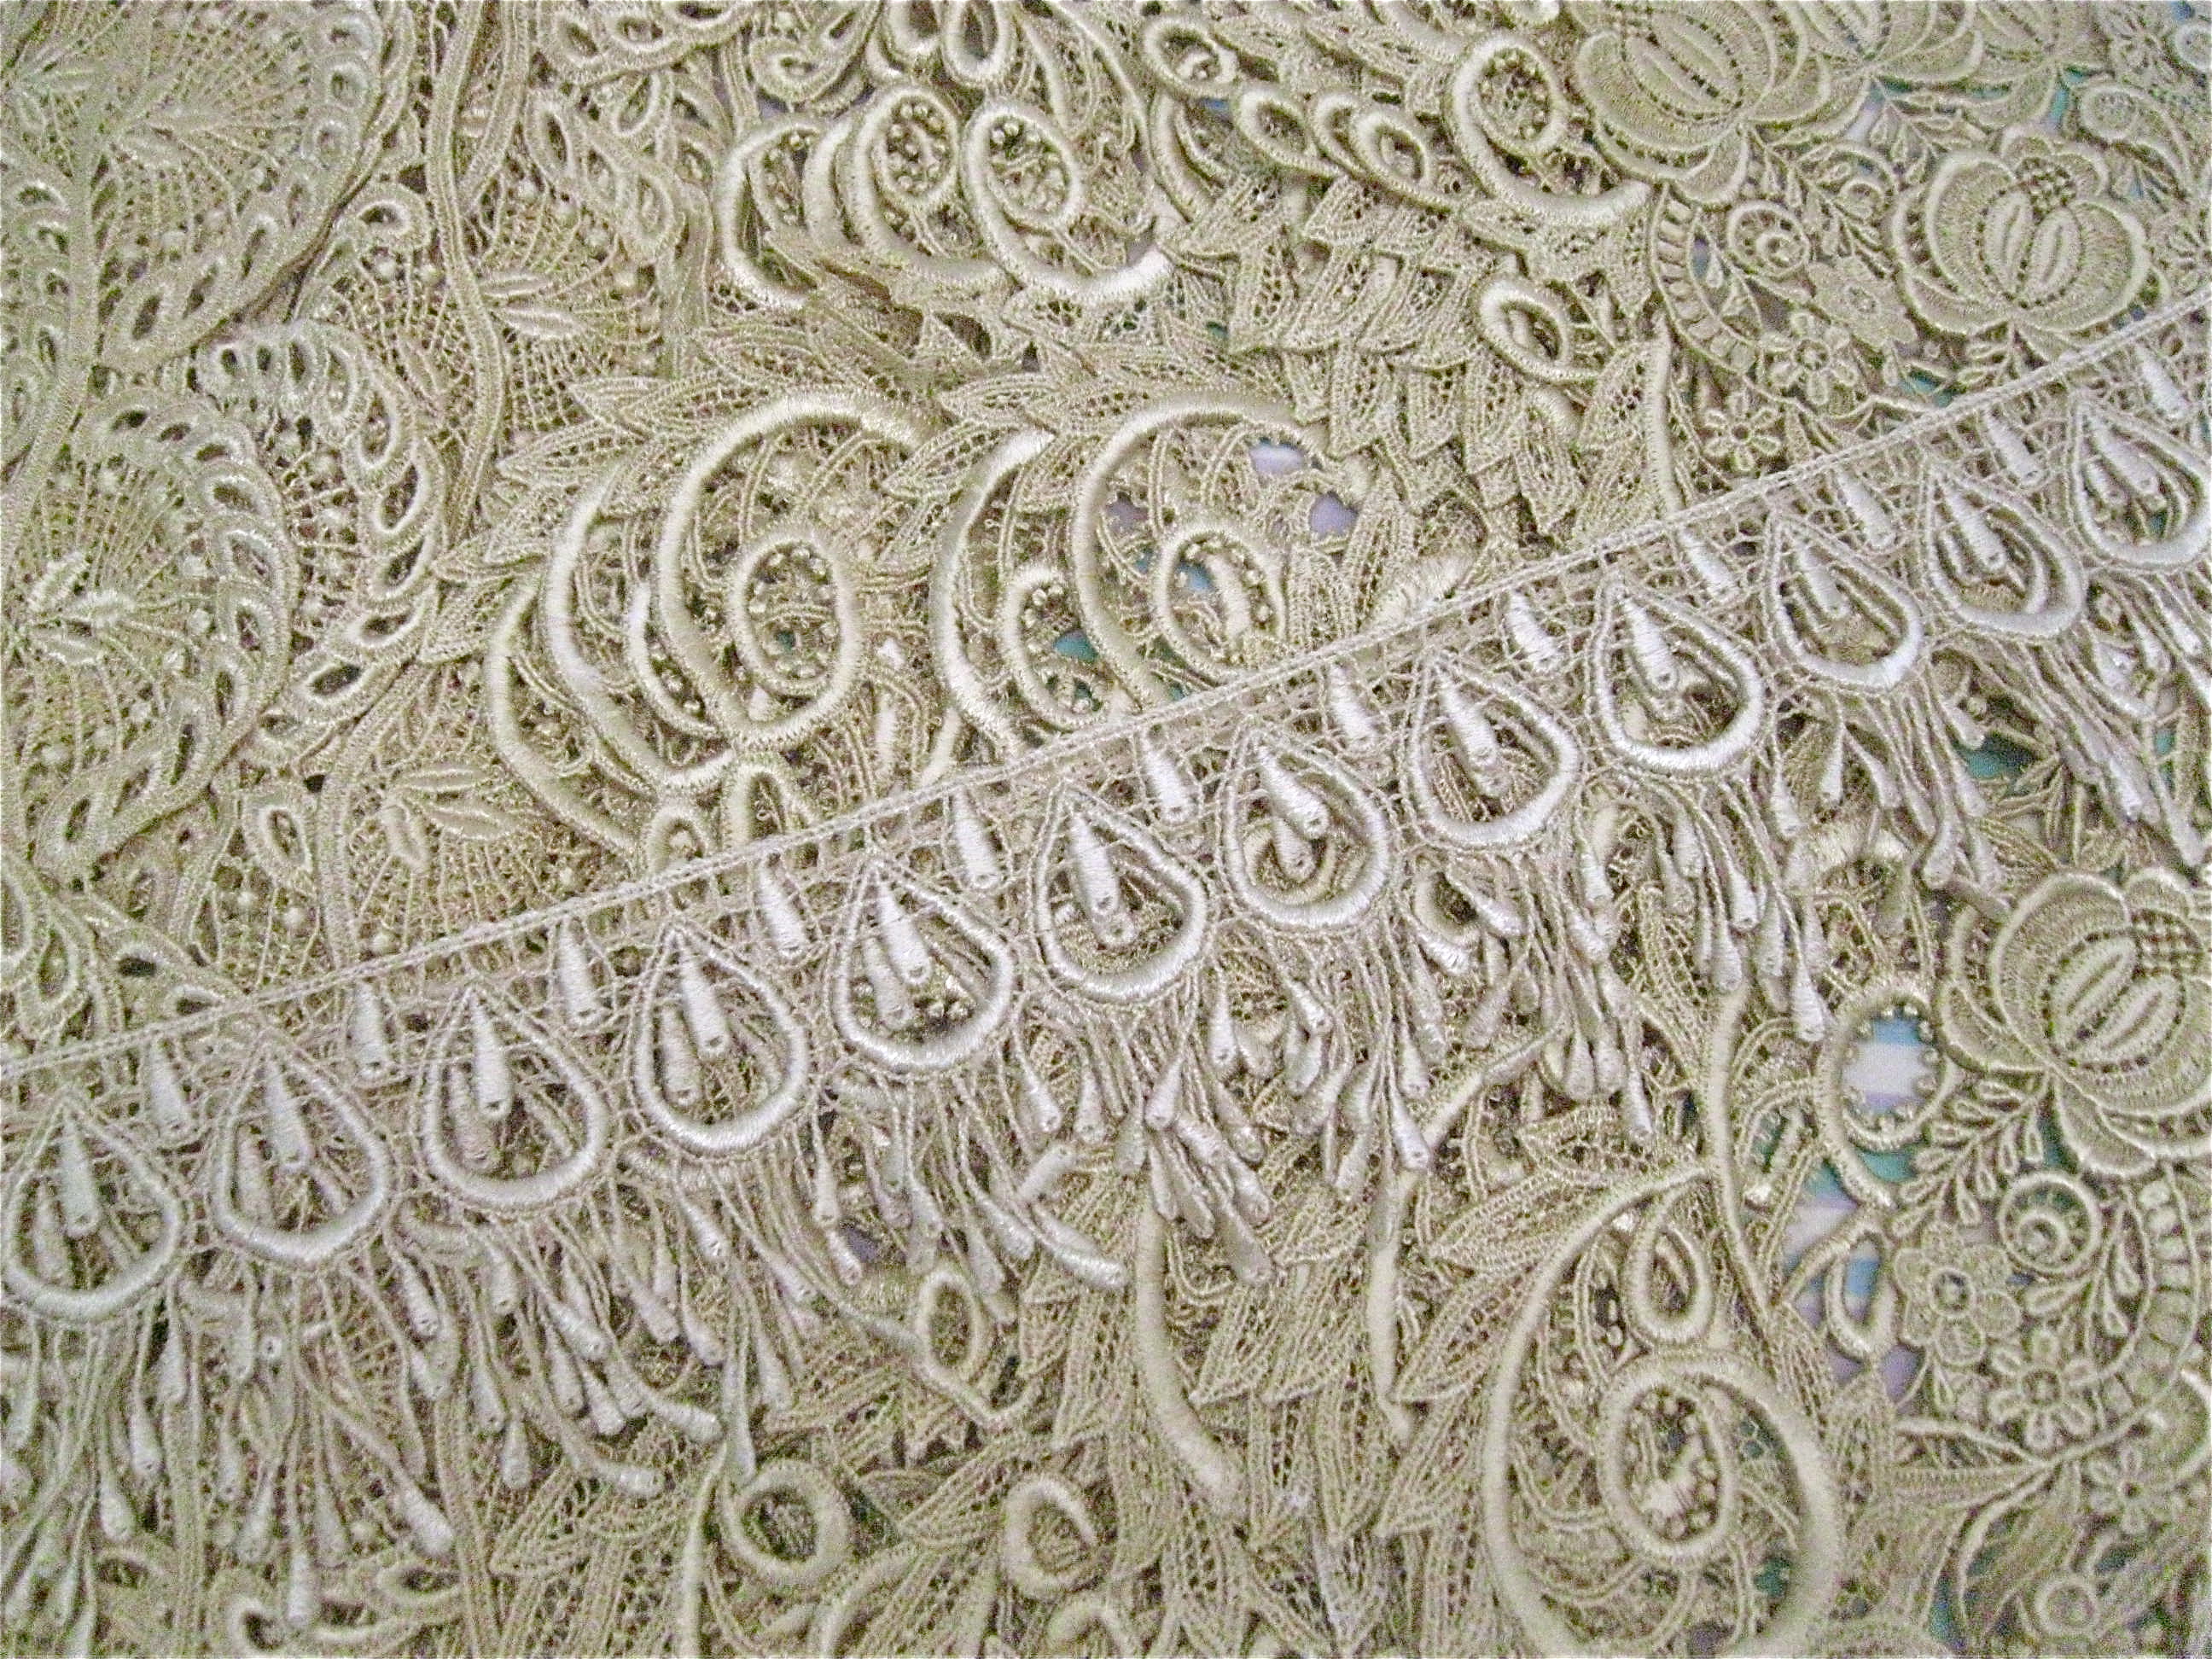 lace dyed